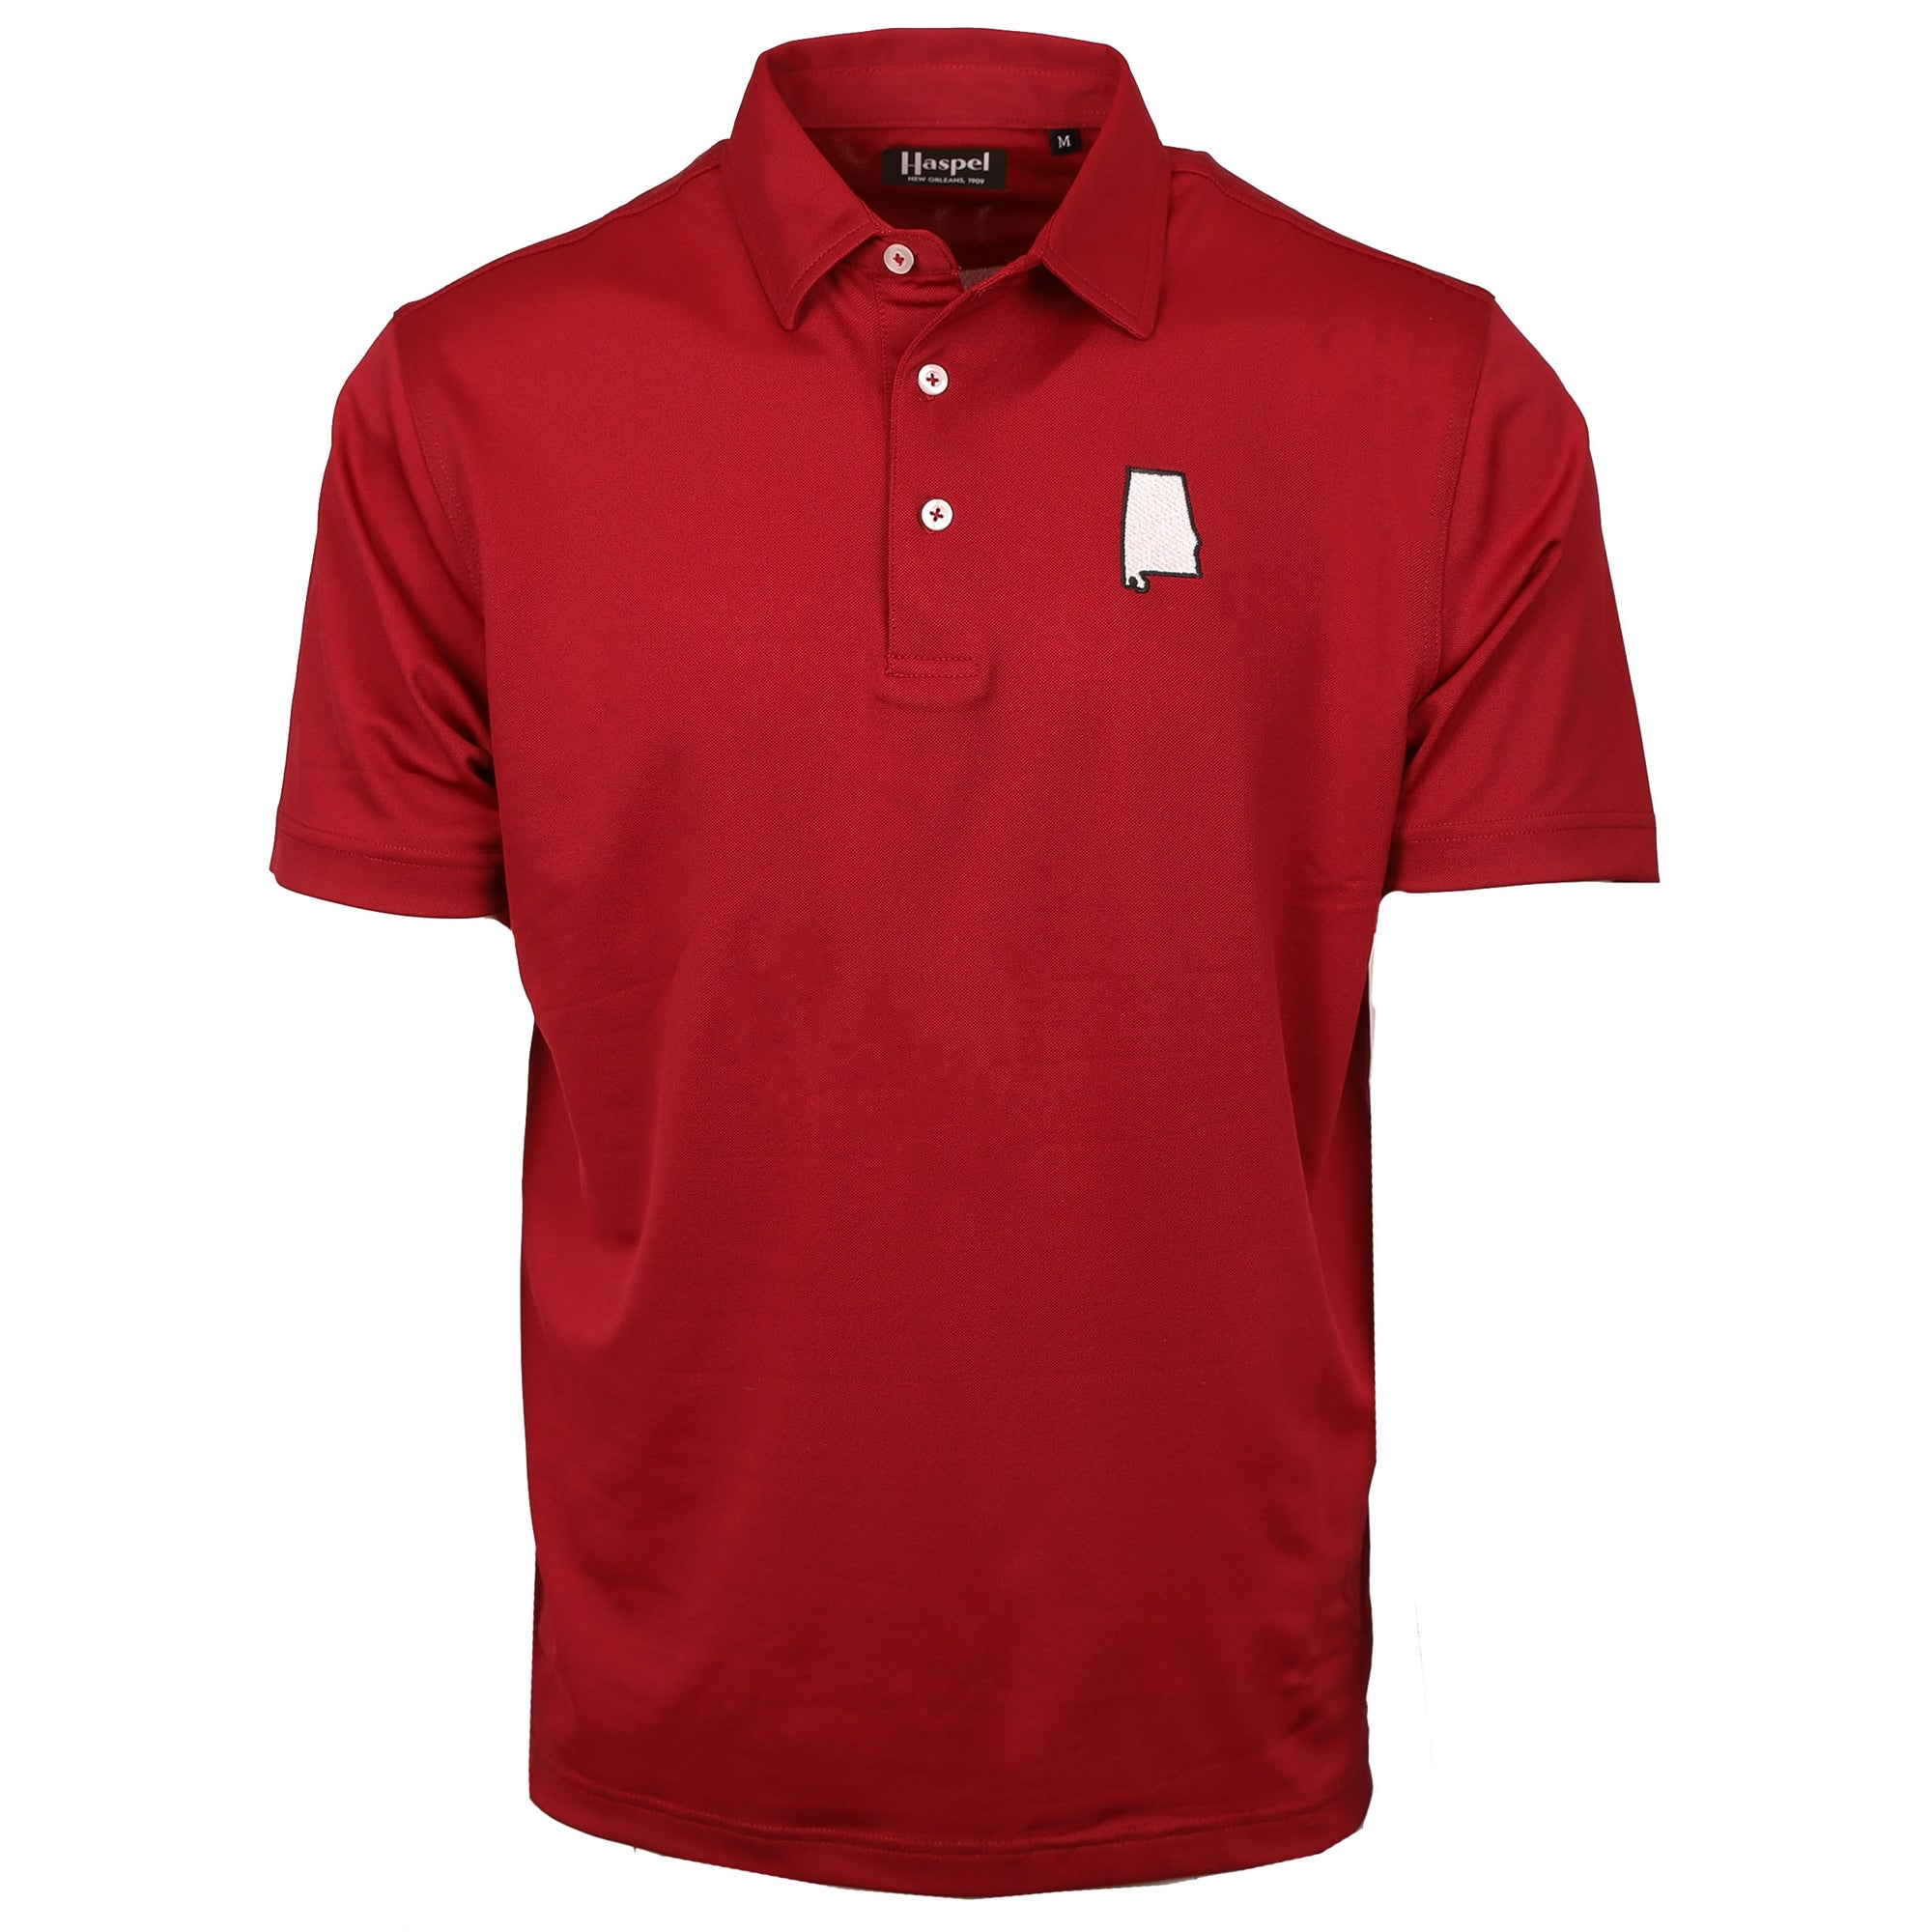 Call it red, burgundy, or crimson, whatever you like. A classic style, a bold color, all rolled into one for wherever the tides may take you.  95% Cotton / 5% Spandex • 3 Button Placket • No Chest Pocket • Imported • Machine Wash